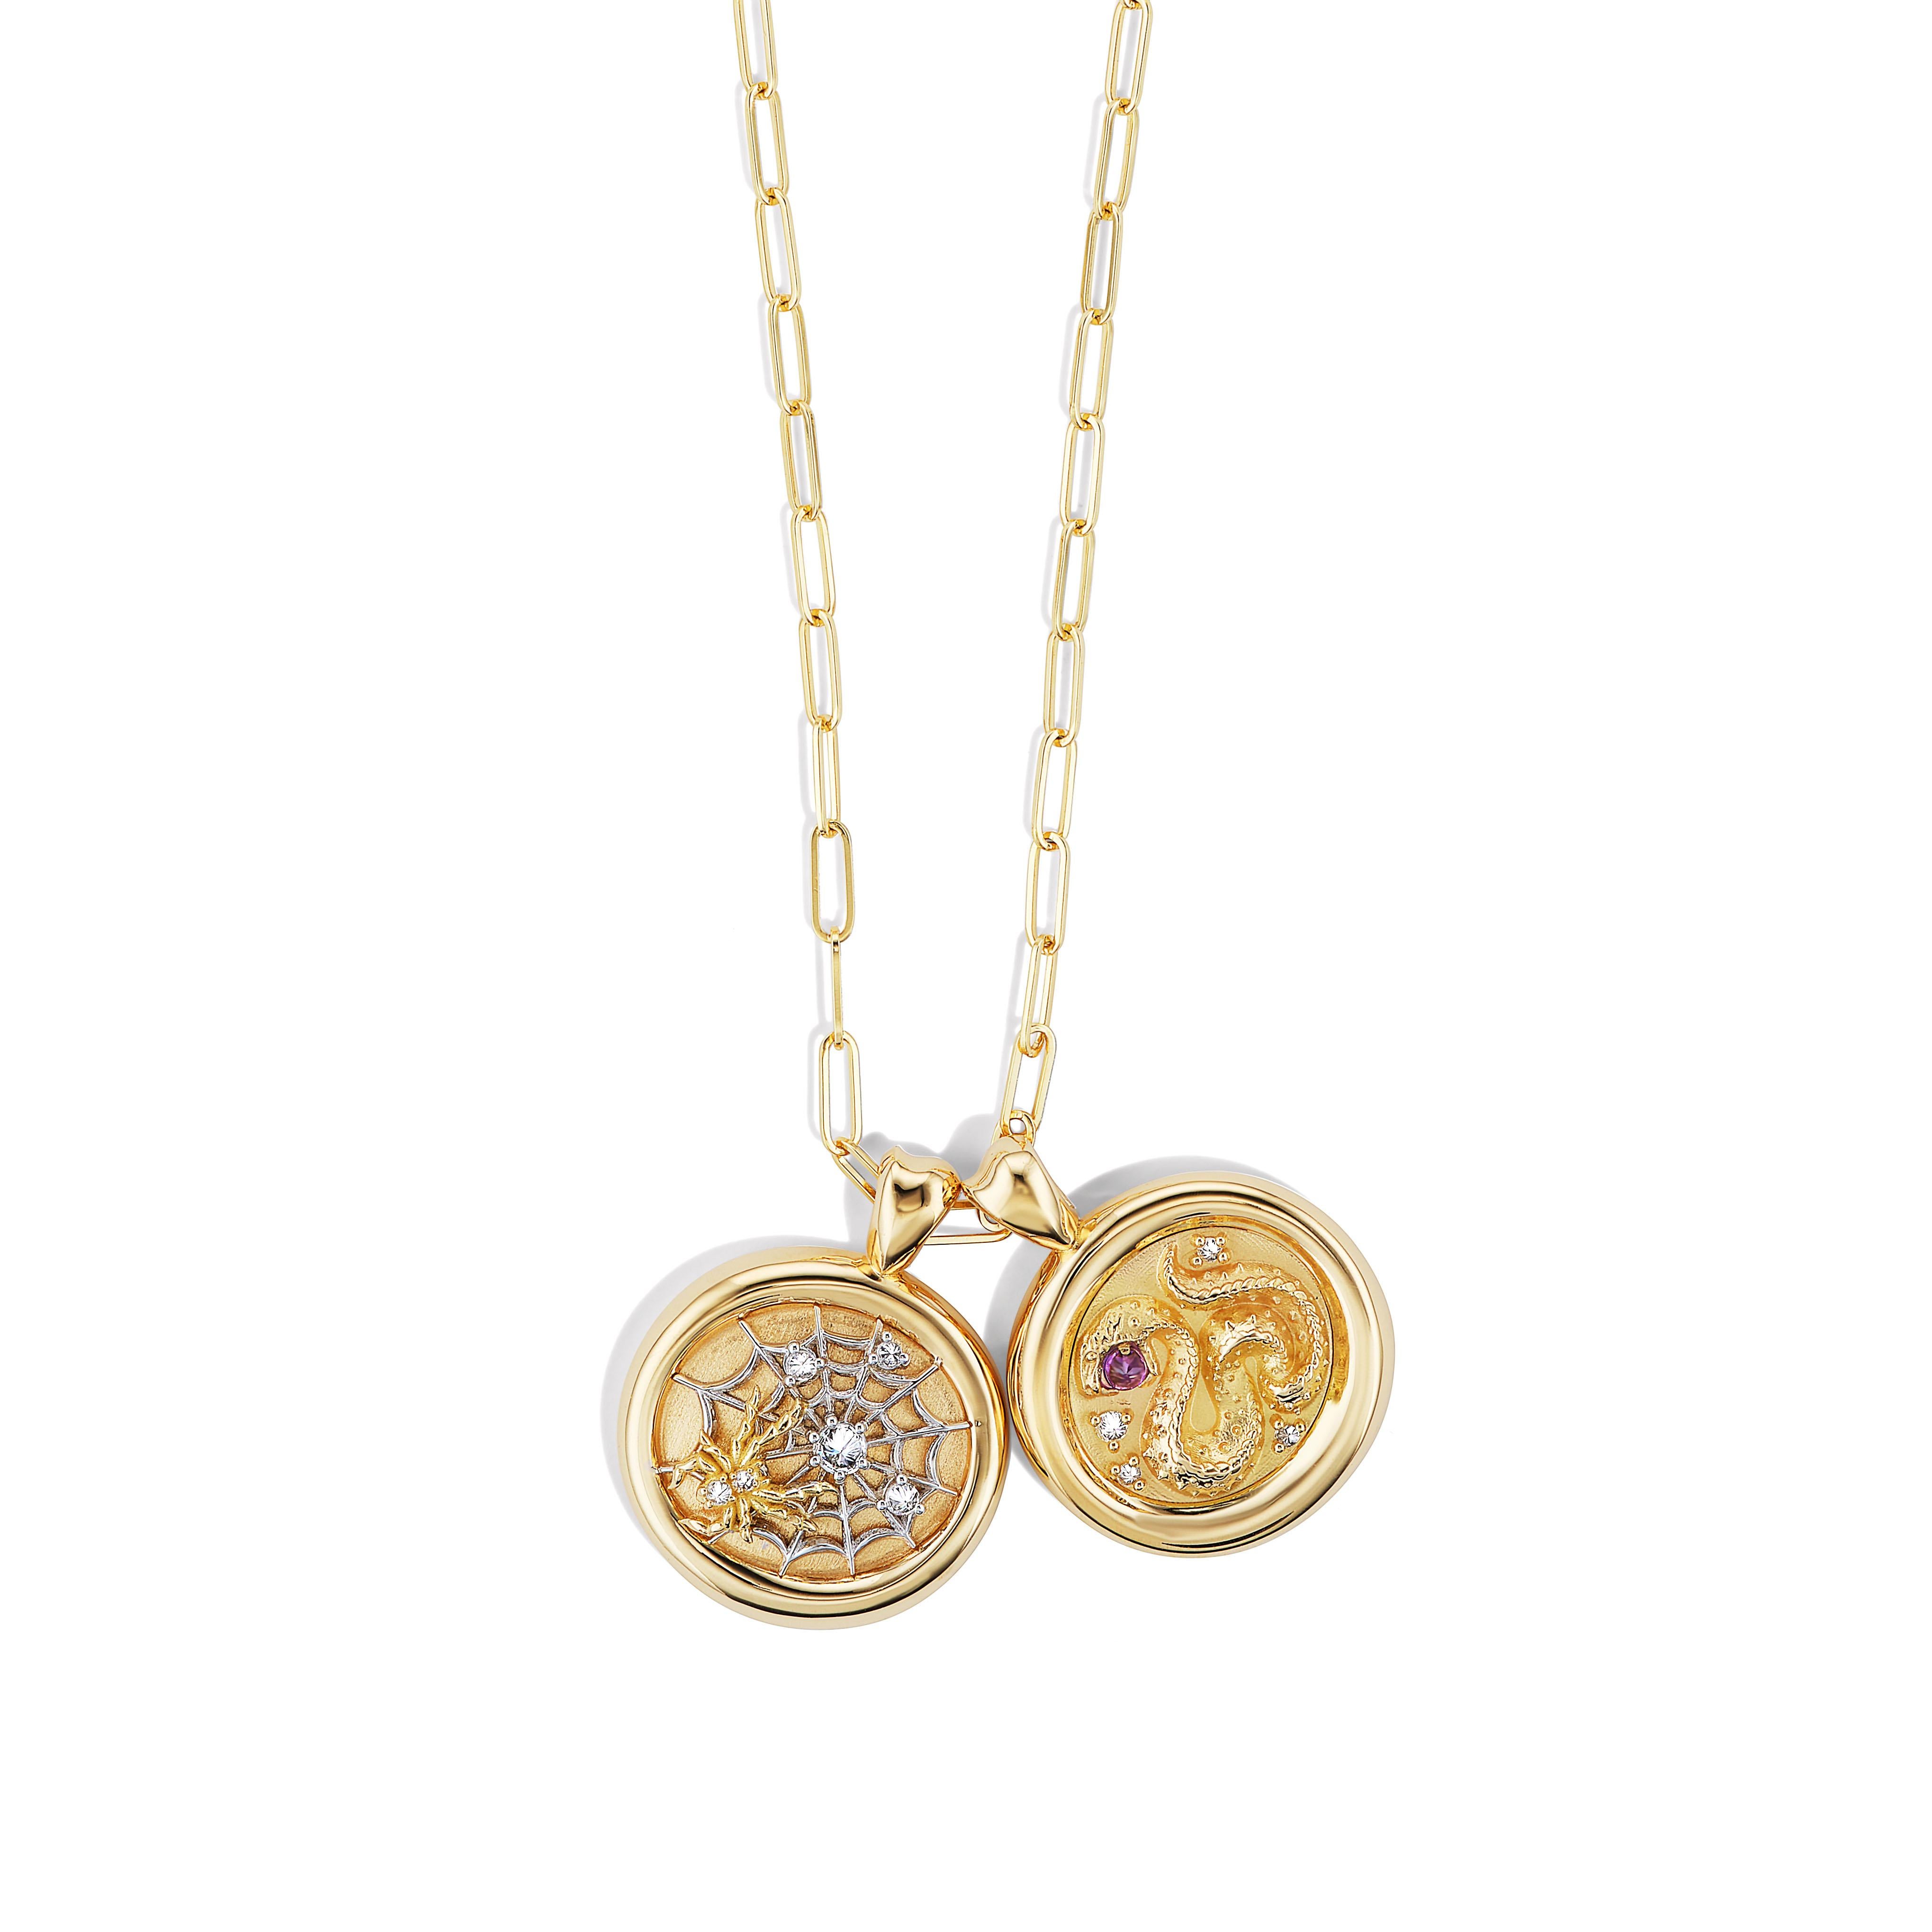 Contemporary AnaKatarina Yellow Gold and Diamond 'Wisdom' Signet Pendant Necklace For Sale